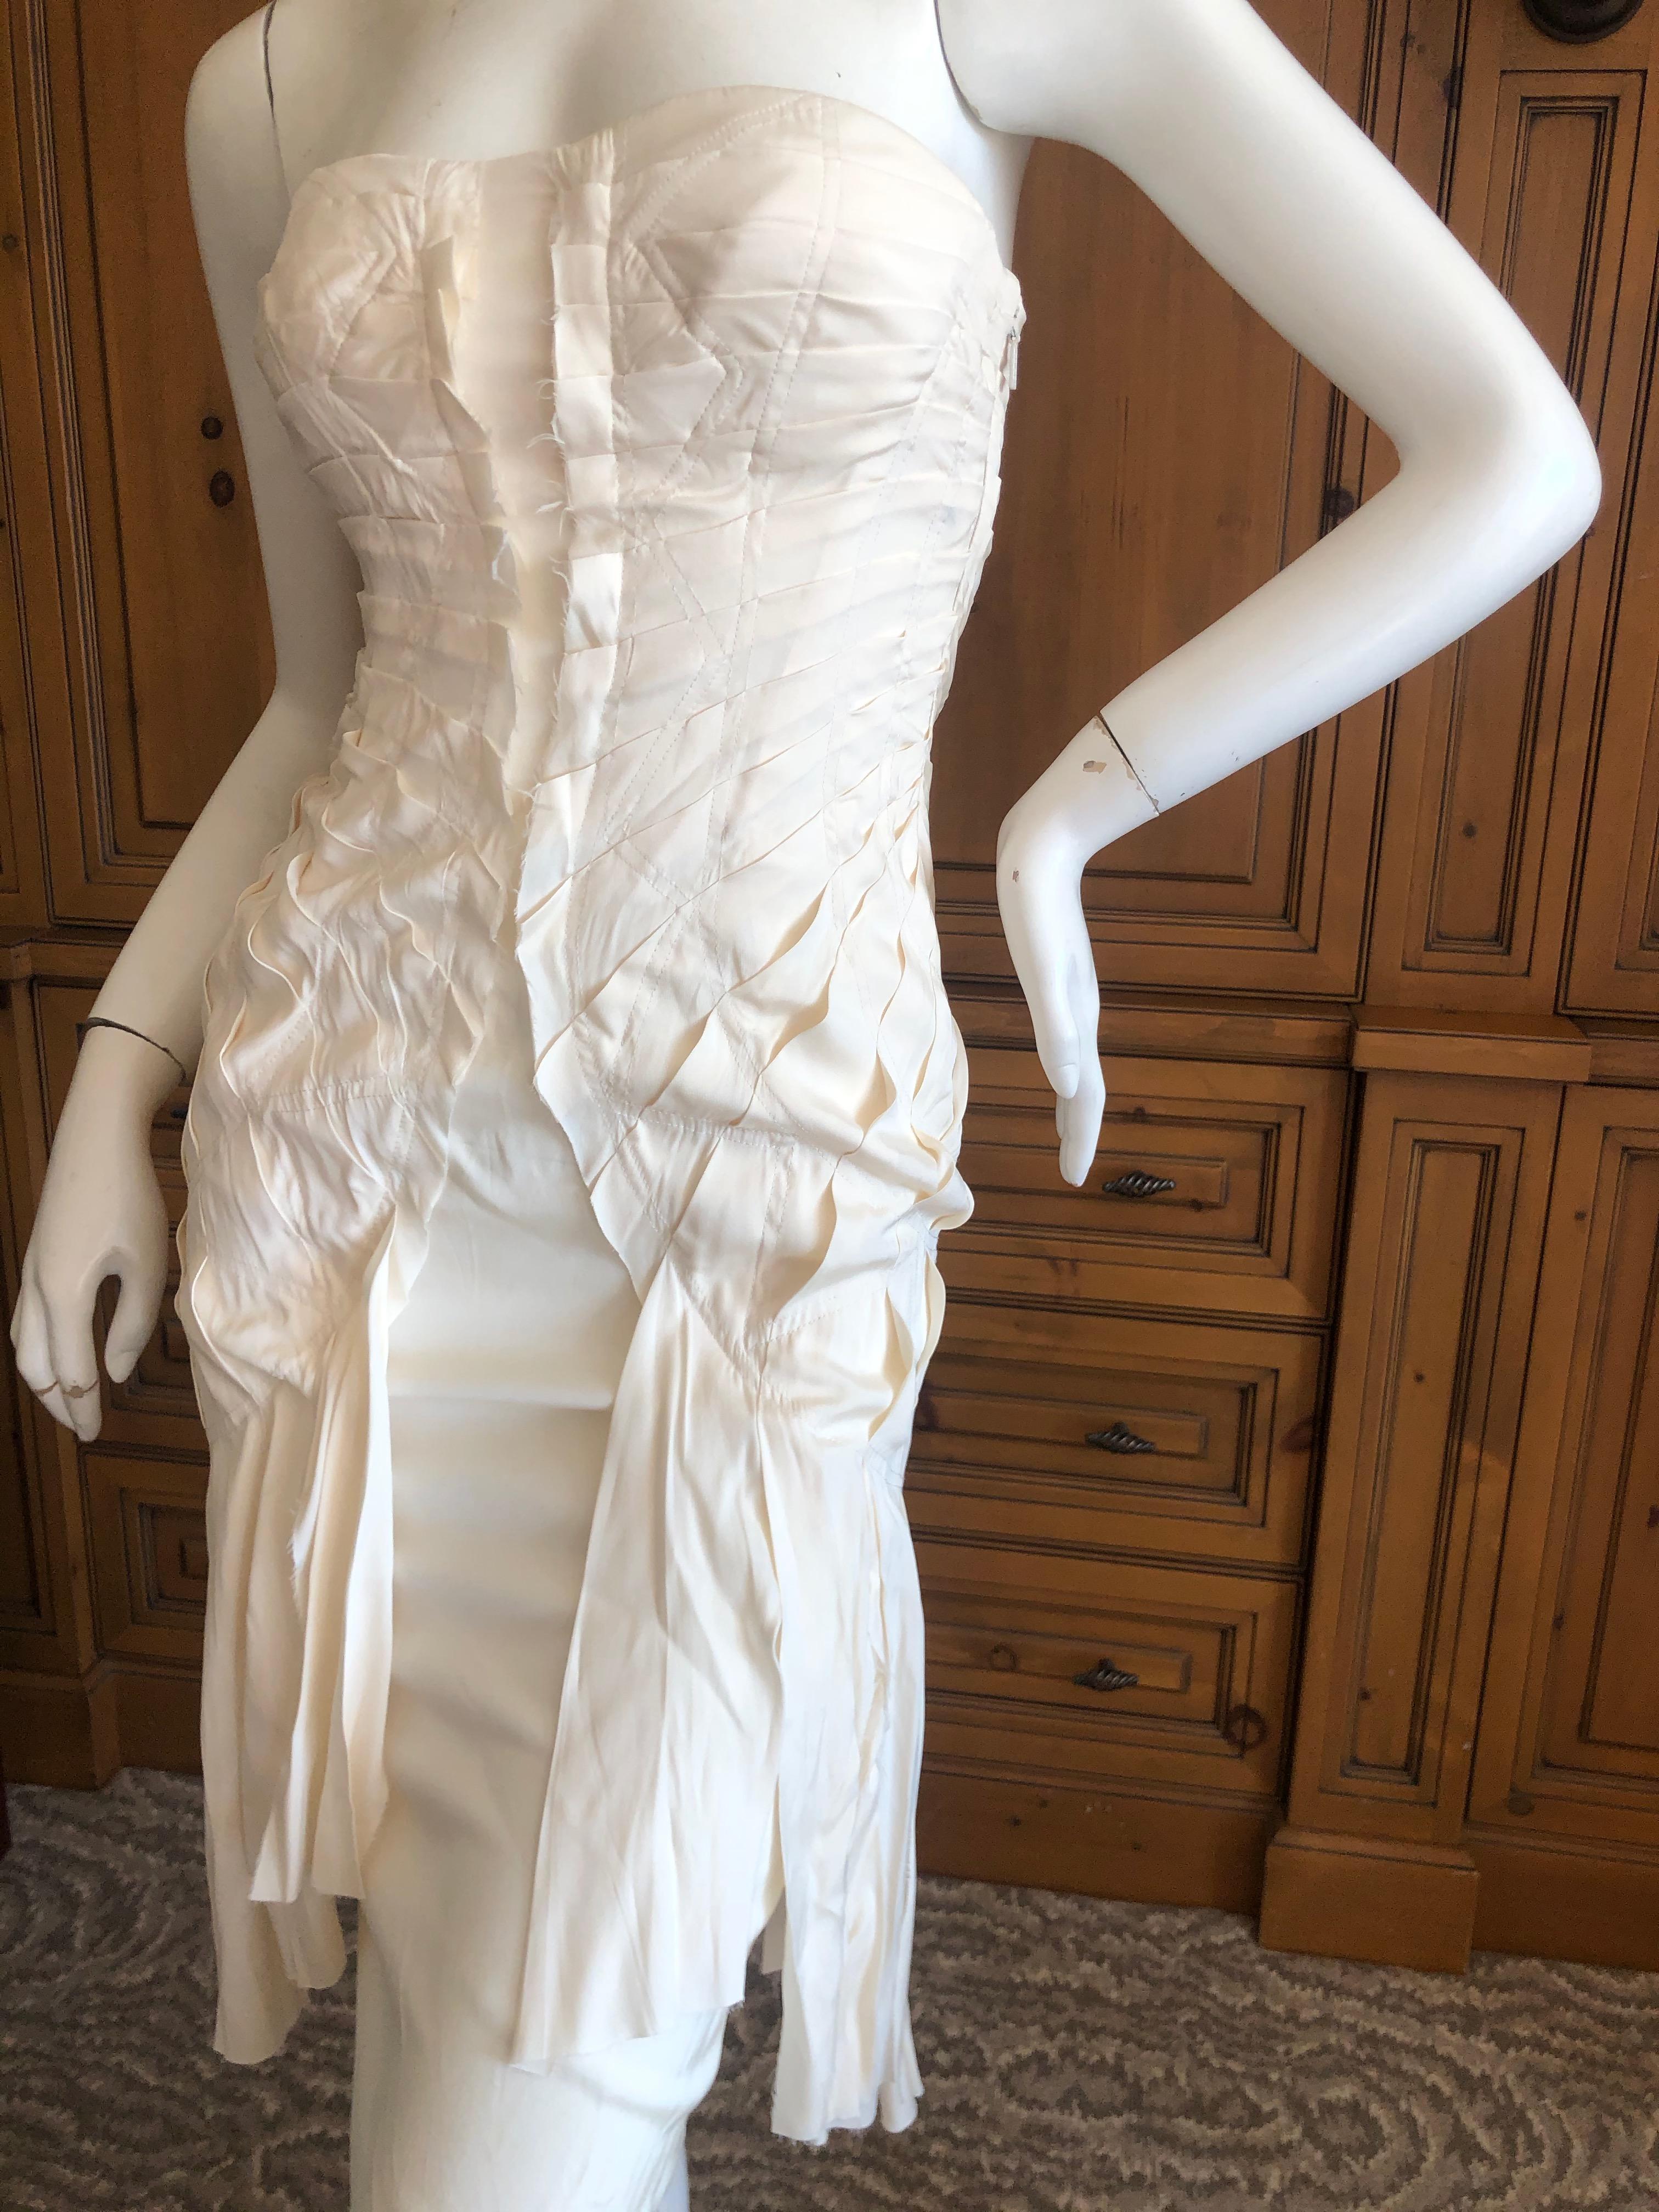 Gucci Tom Ford 2003 Ivory Ribbon Dress.
Ivory Silk , please use the zoom feature to see the details, so pretty.
There are straps included, they are detachable.
Size 40
Bust 34